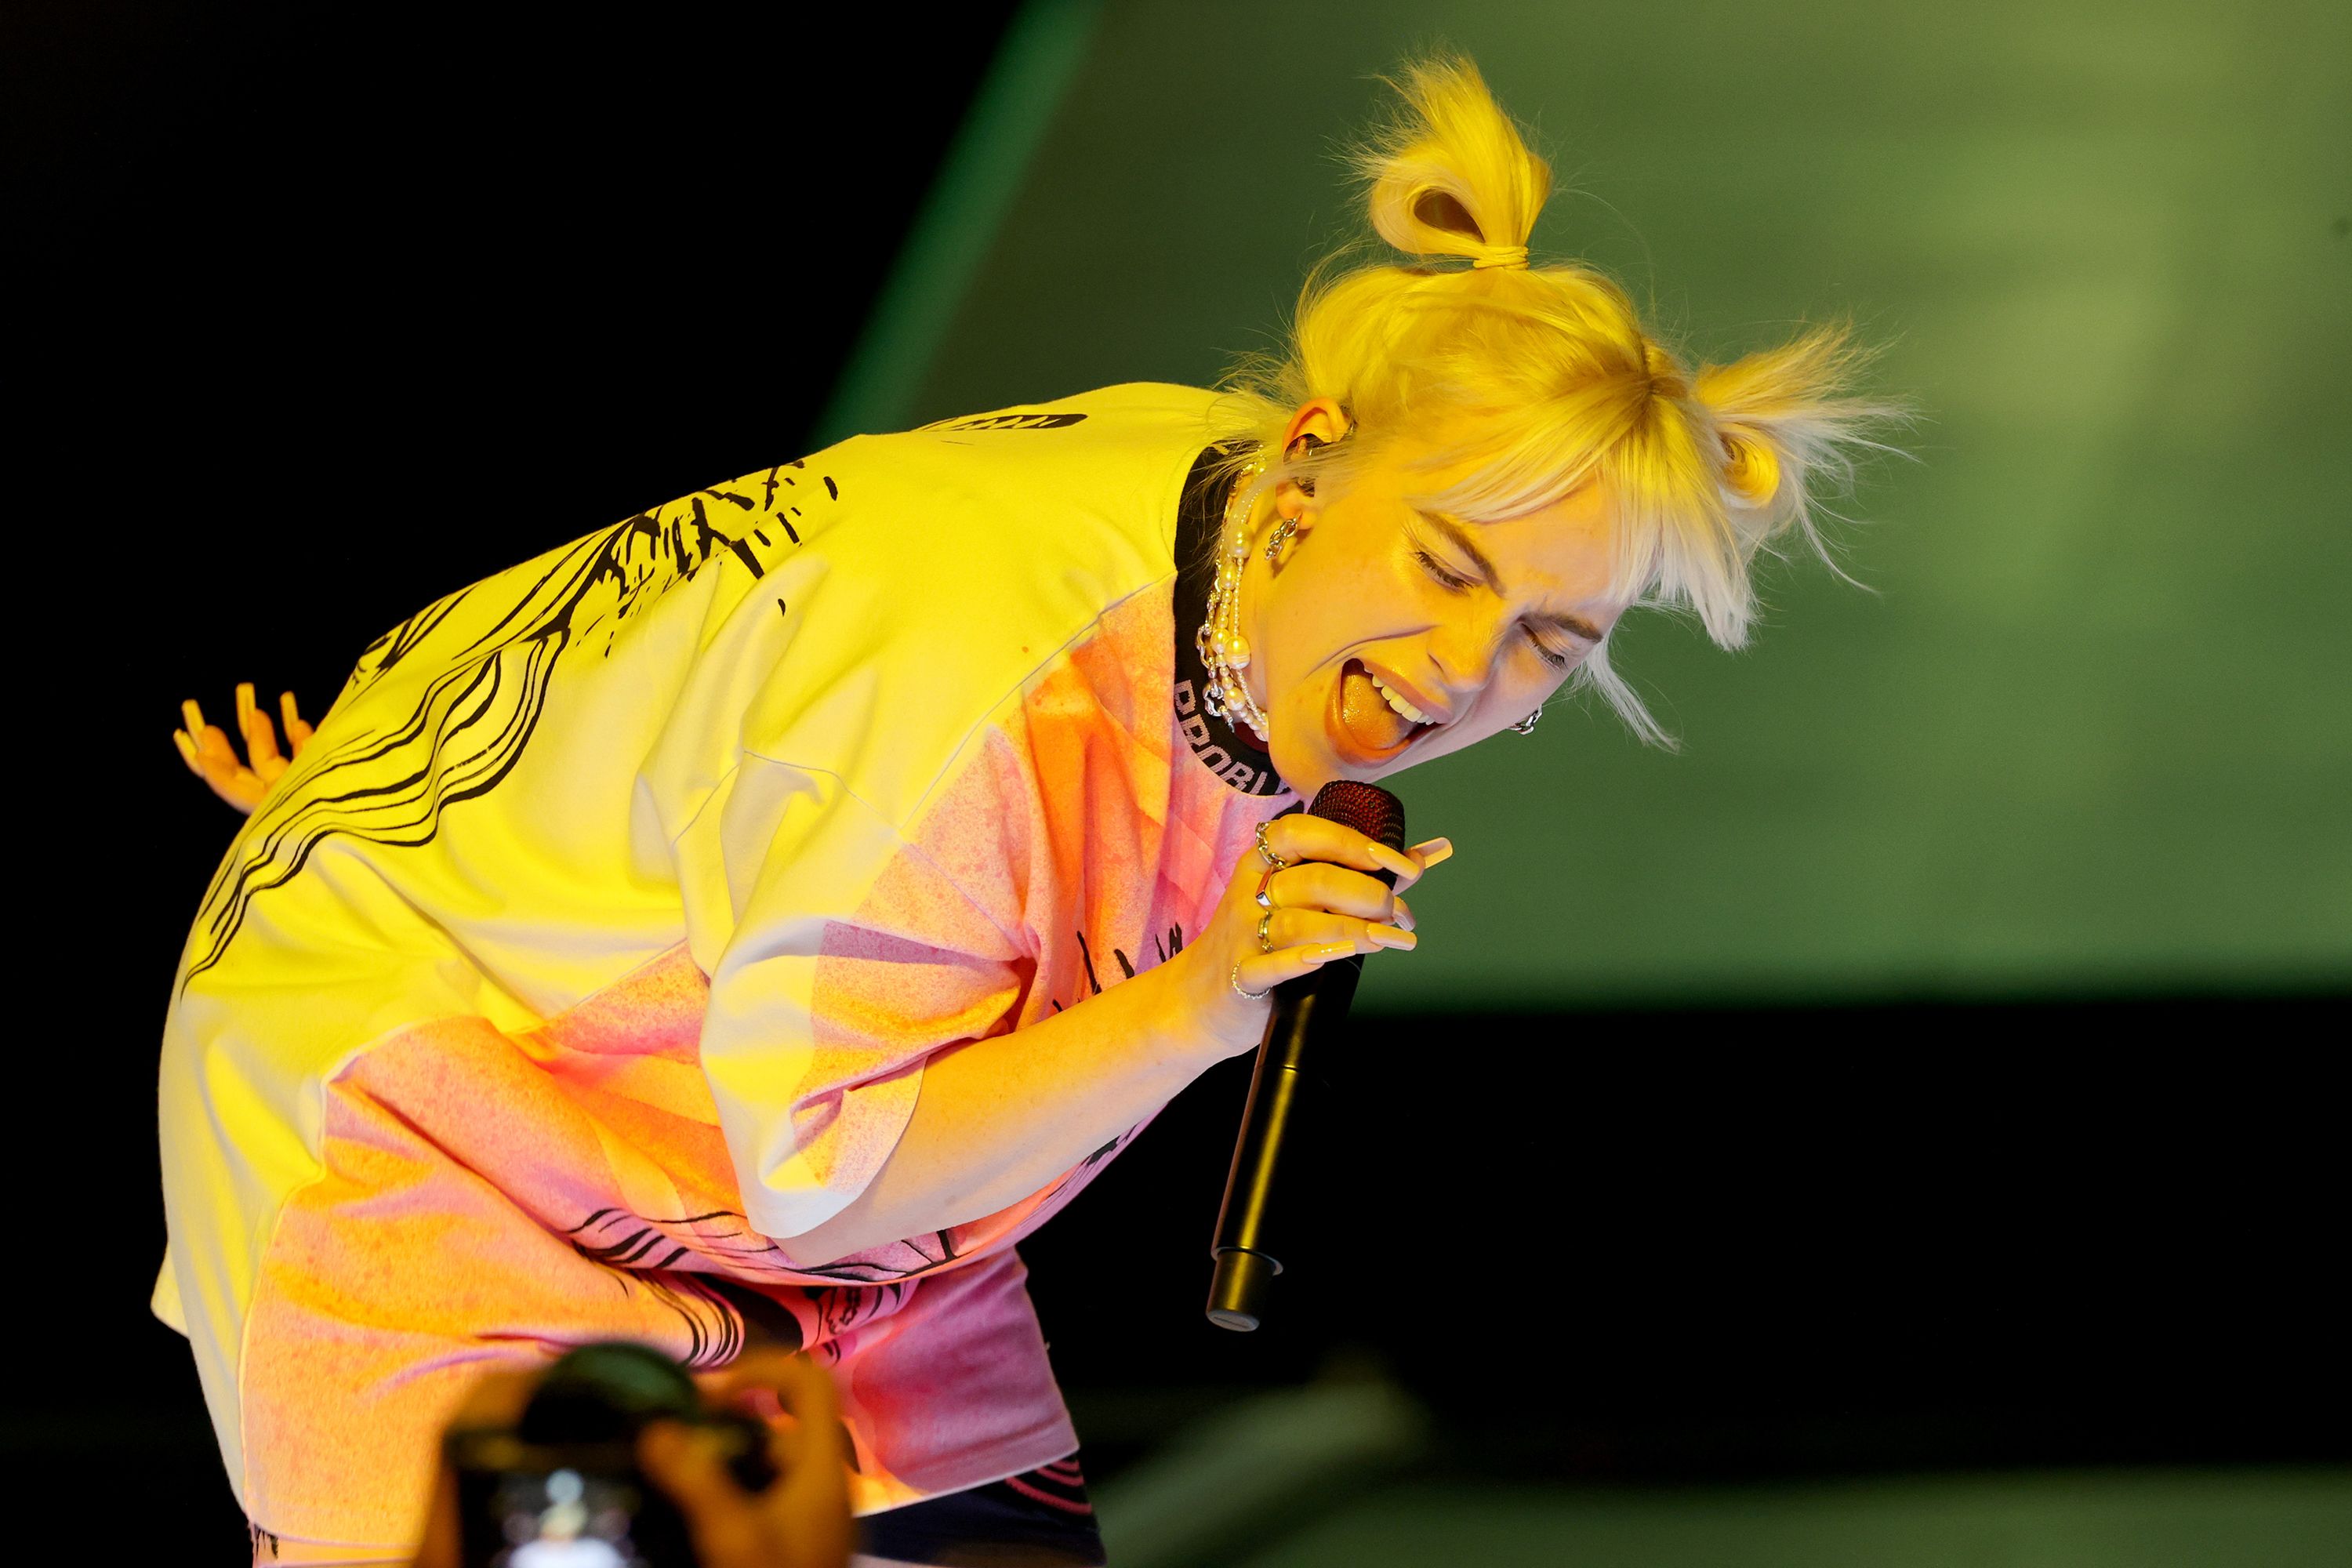 cp wai recommends Billie Eilish Real Nude